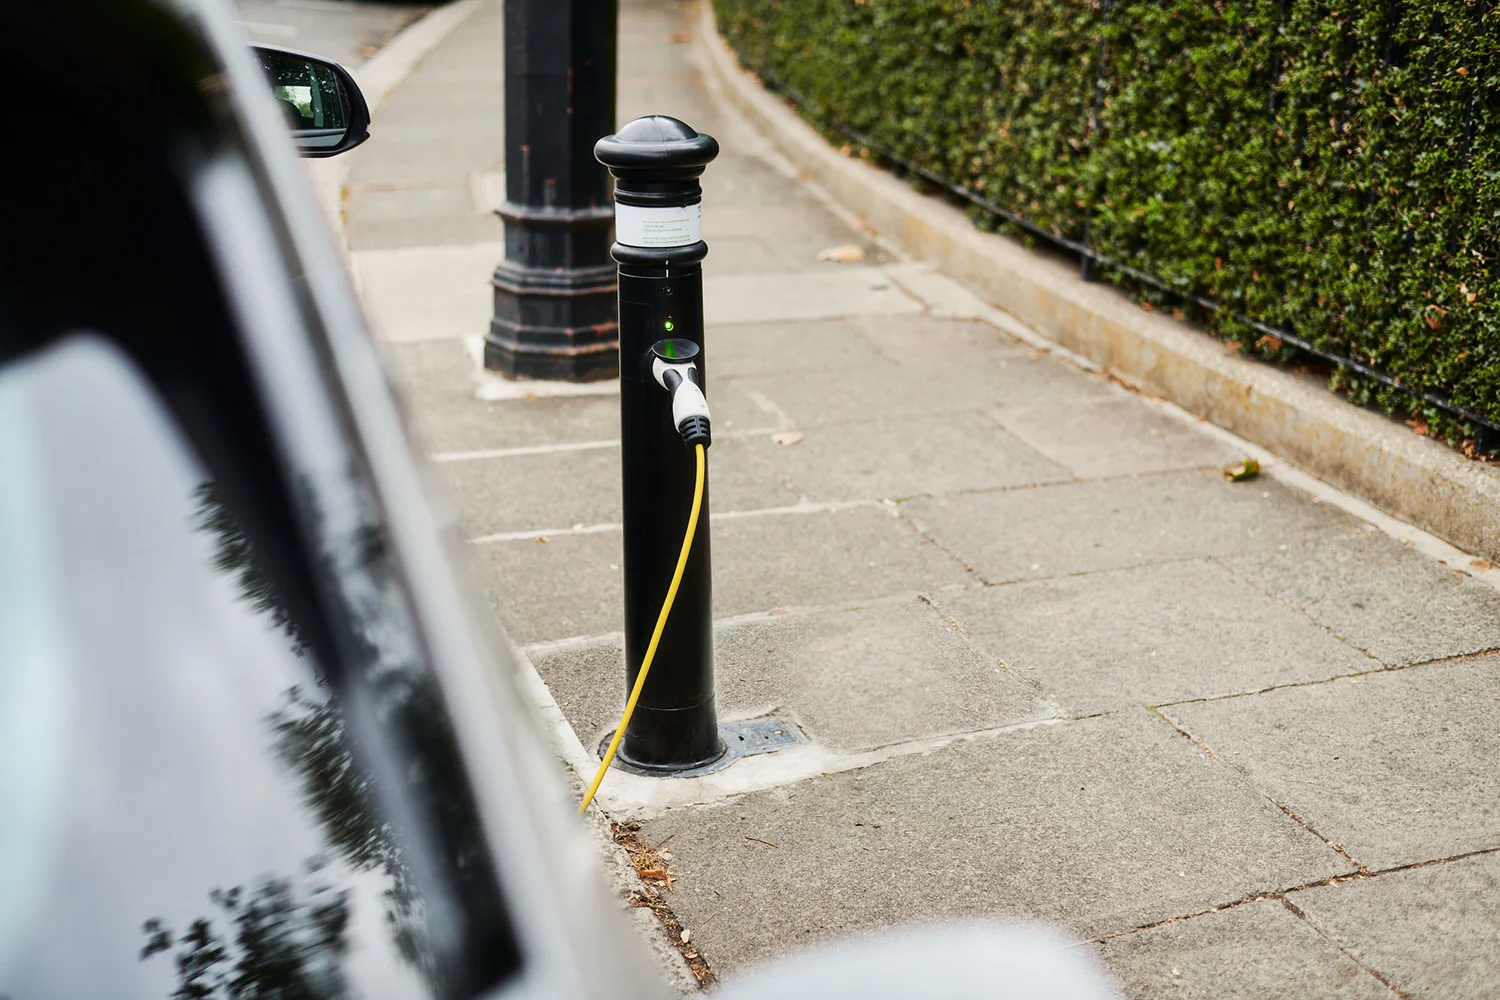 An EV is charging at an ubitricity bollard charge point, a charging solution for on street charging in residential areas.